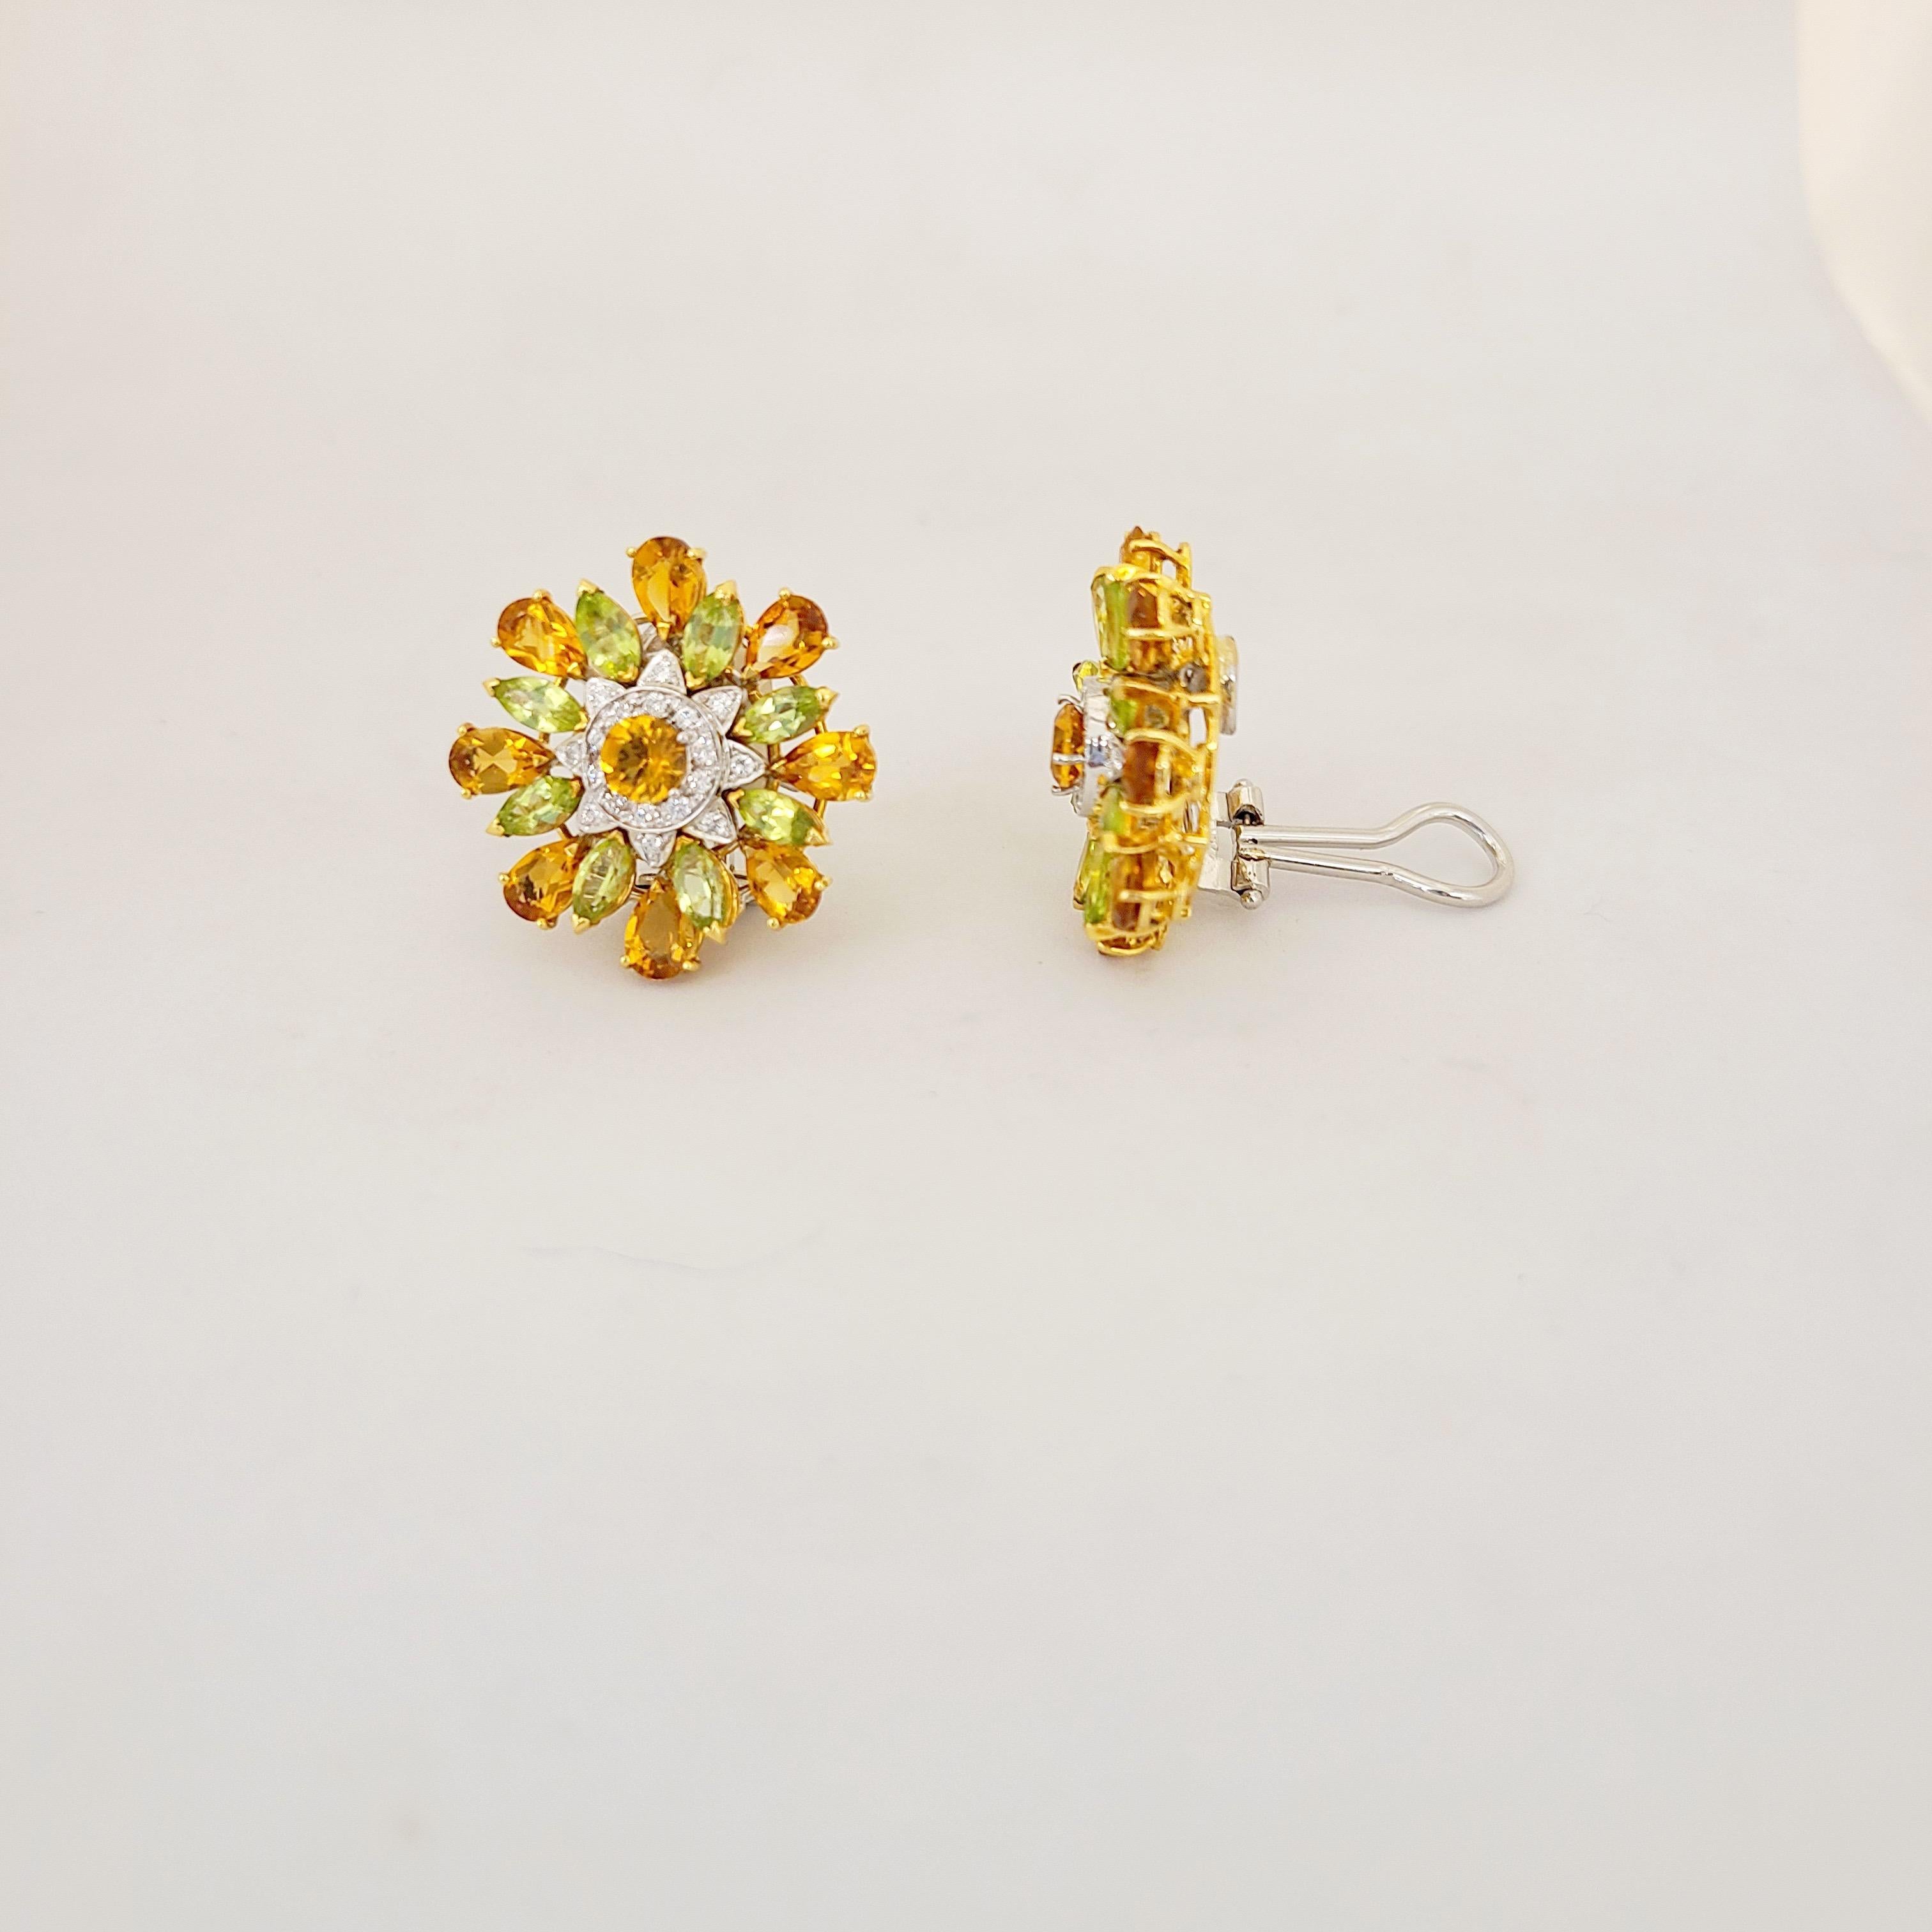 Made exclusively for Cellini by Barizza & Ci SRL of Italy. These flower earrings are designed with pear shaped citrine and marquis shaped stones as peridot petals. The center of the flowers are round brilliant cut citrine with a single   The flower